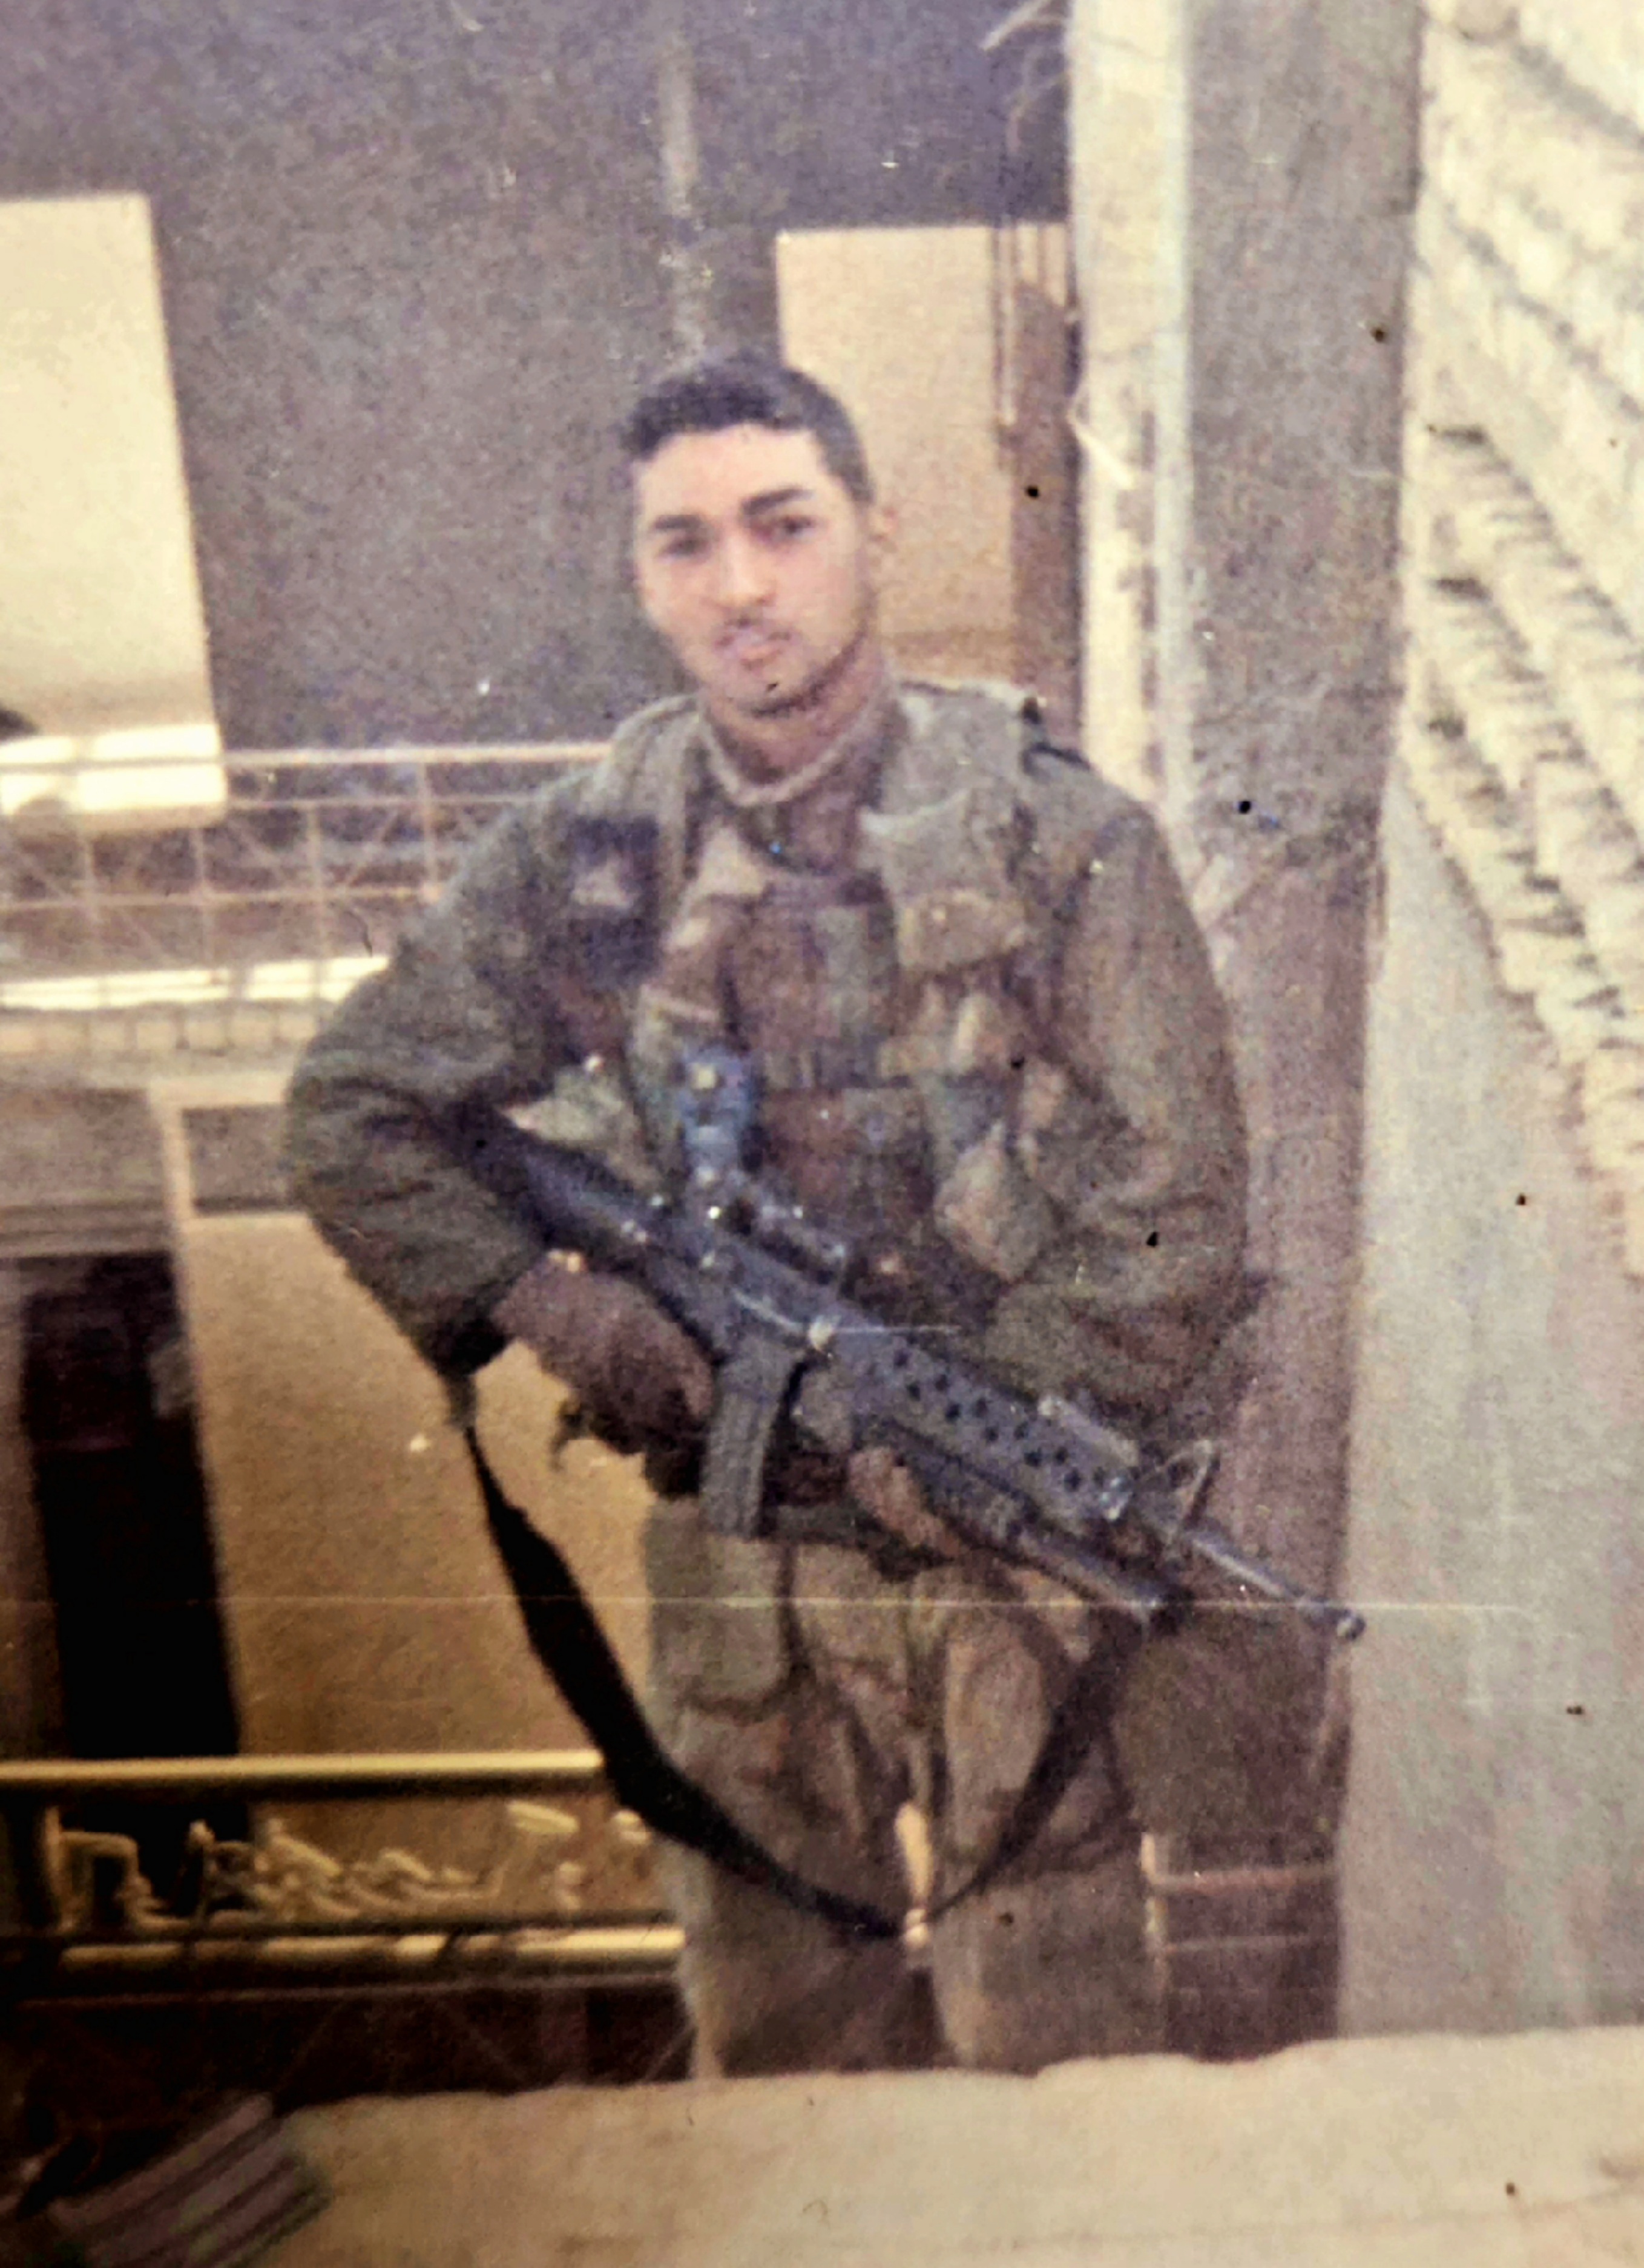 Miguel Ramirez serving in the Army